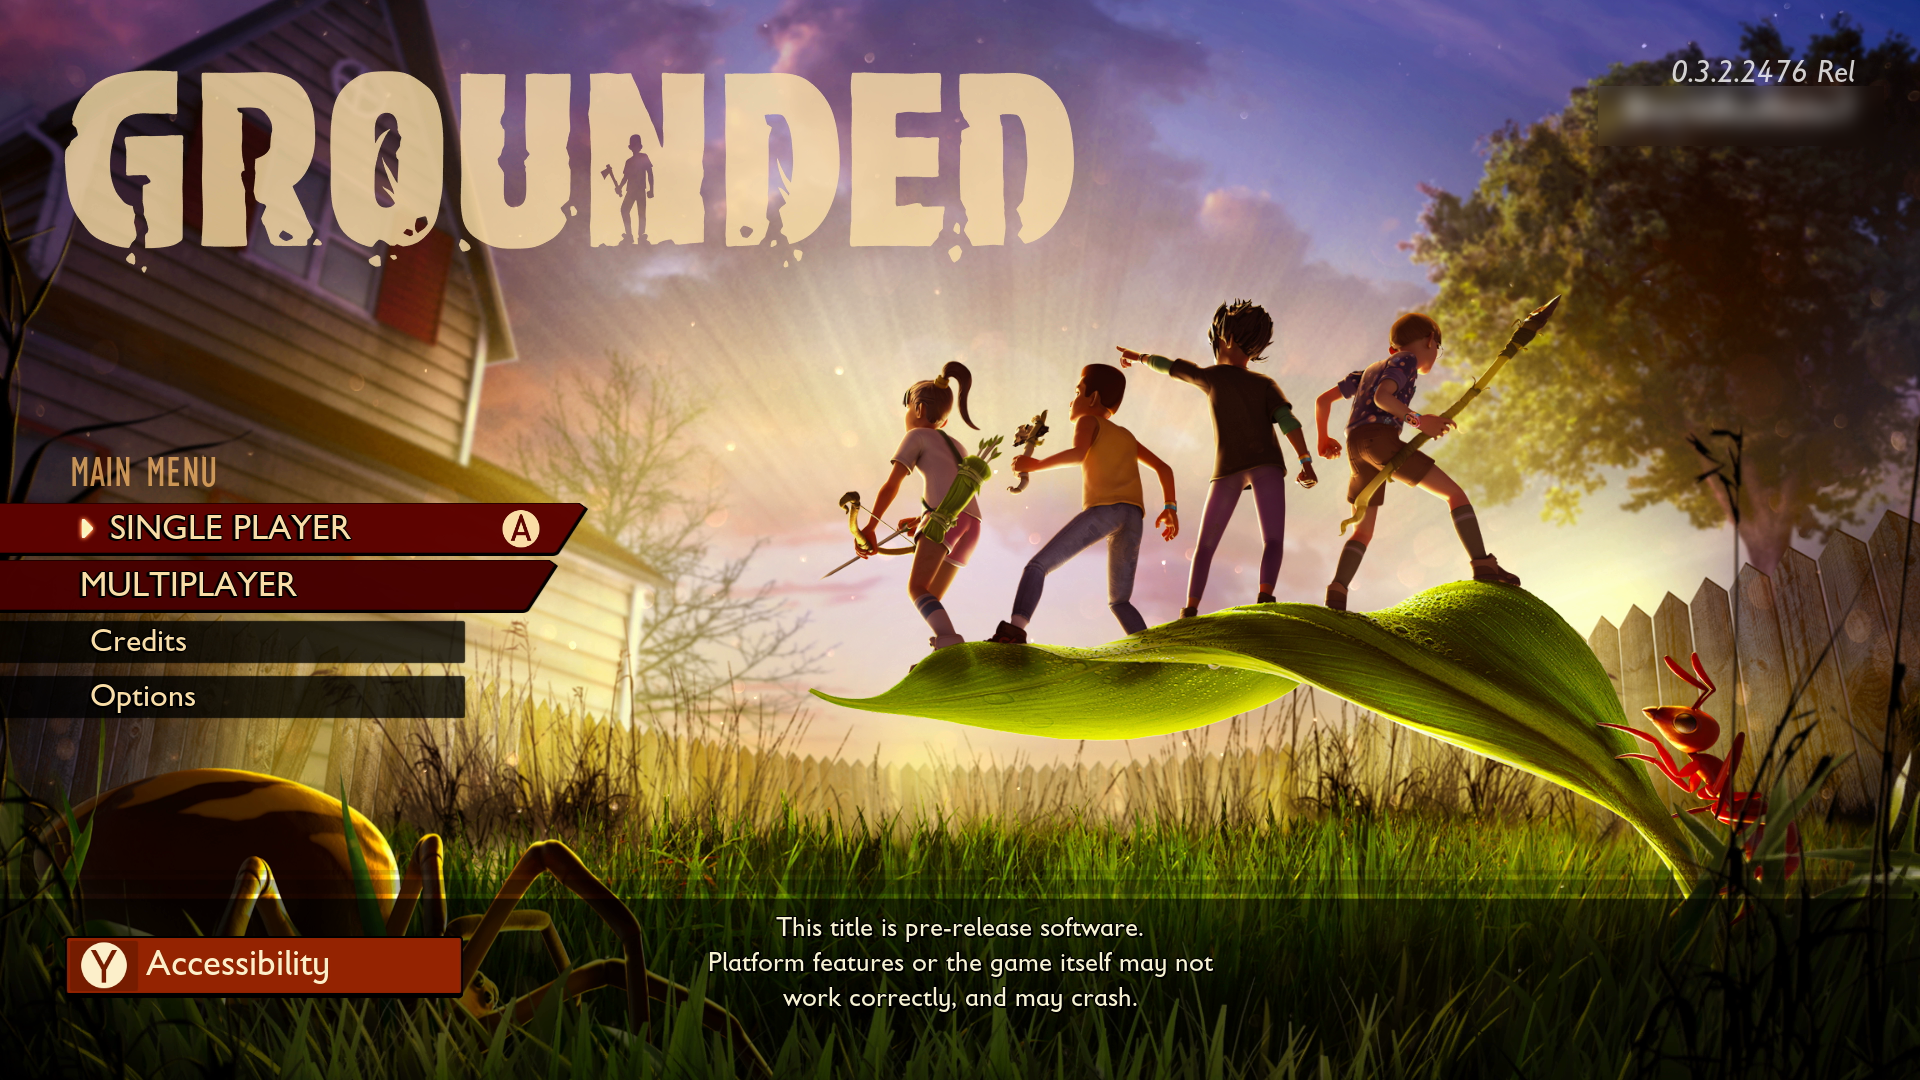 A screenshot from the game Grounded that shows the main menu with various options the user can chose from, including "Single Player," Multiplayer," and "Quit."